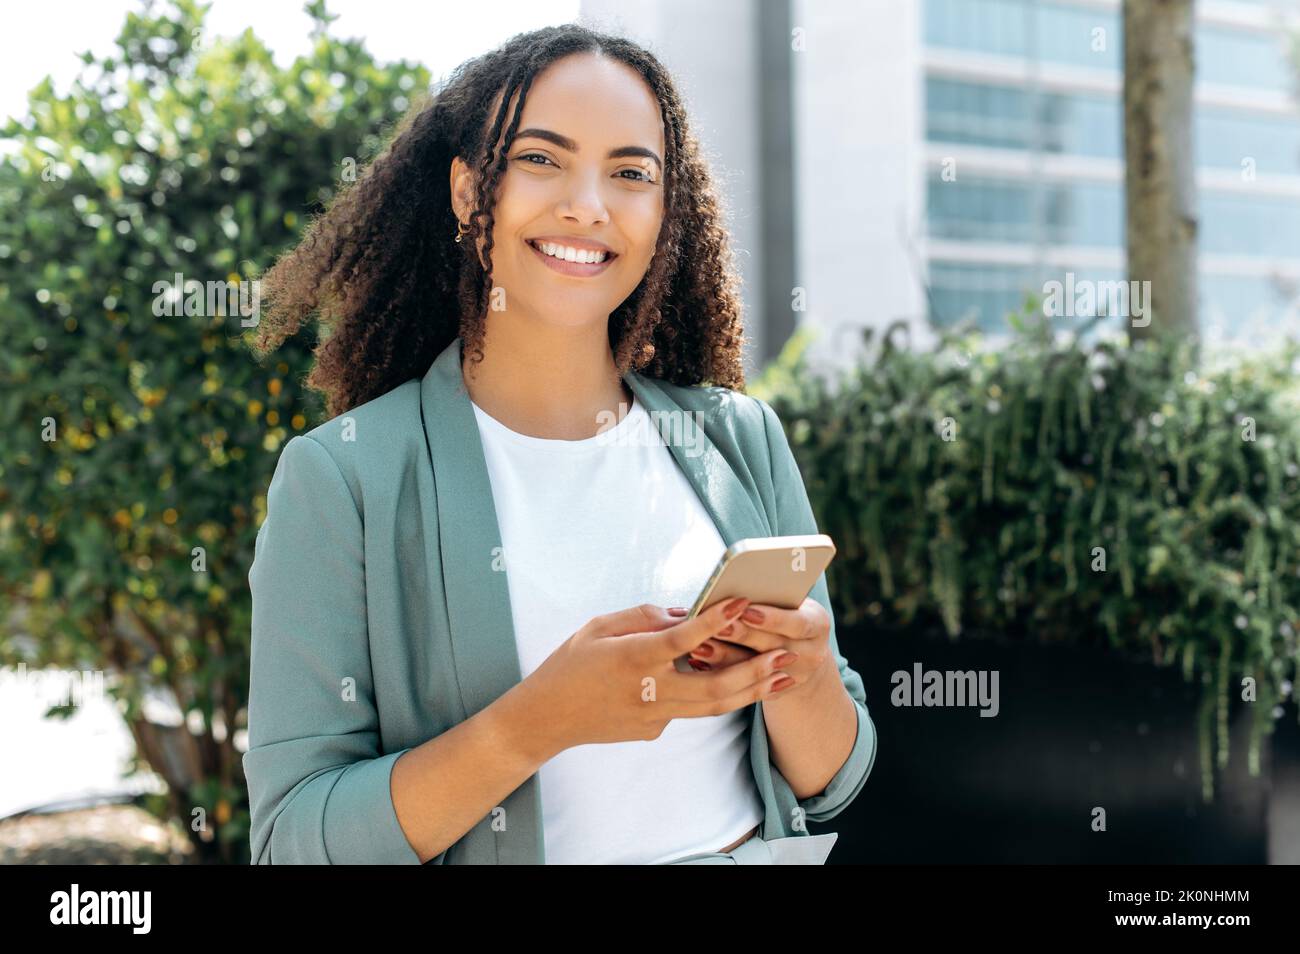 Using gadget. Positive hispanic or brazilian curly haired young woman, stylishly dressed, using her cell phone, stands outdoors, messaging online with friends on social media, looks at camera, smiling Stock Photo